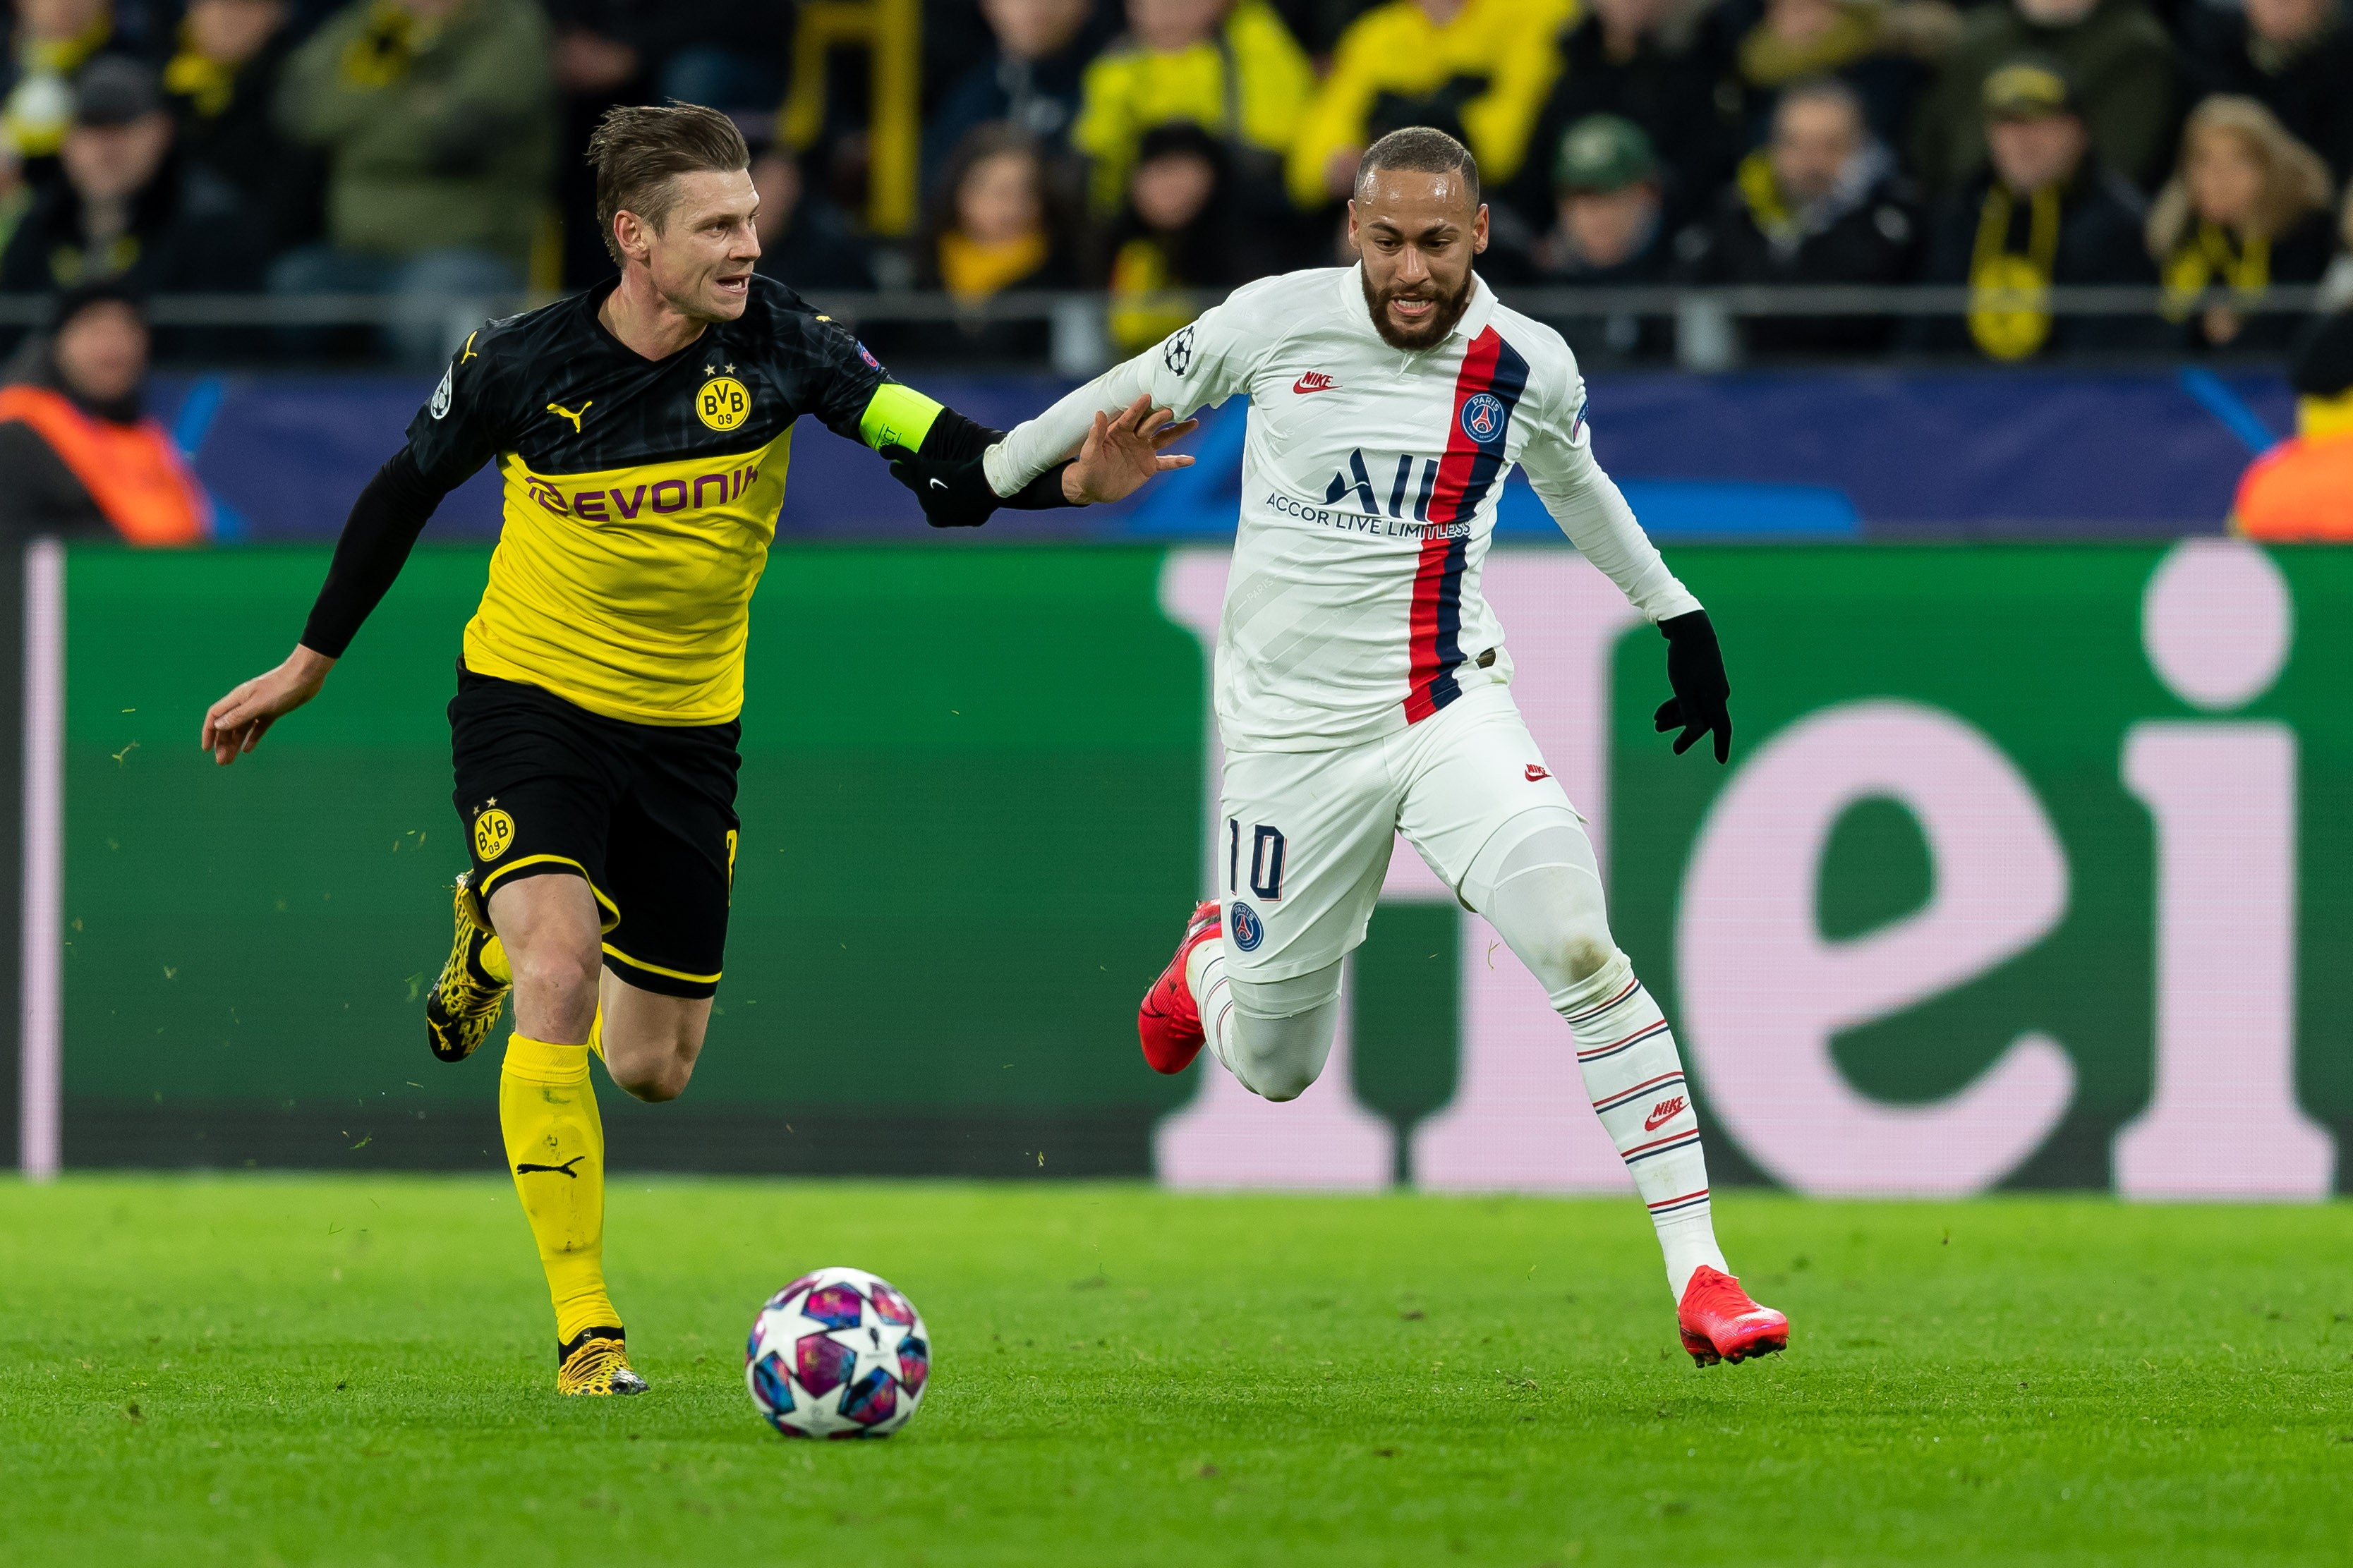 DORTMUND, GERMANY - FEBRUARY 18: (BILD ZEITUNG OUT) Lukasz Piszczek of Borussia Dortmund and Neymar of Paris Saint-Germain battle for the ball during the UEFA Champions League round of 16 first leg match between Borussia Dortmund and Paris Saint-Germain a (Foto: Getty Images)